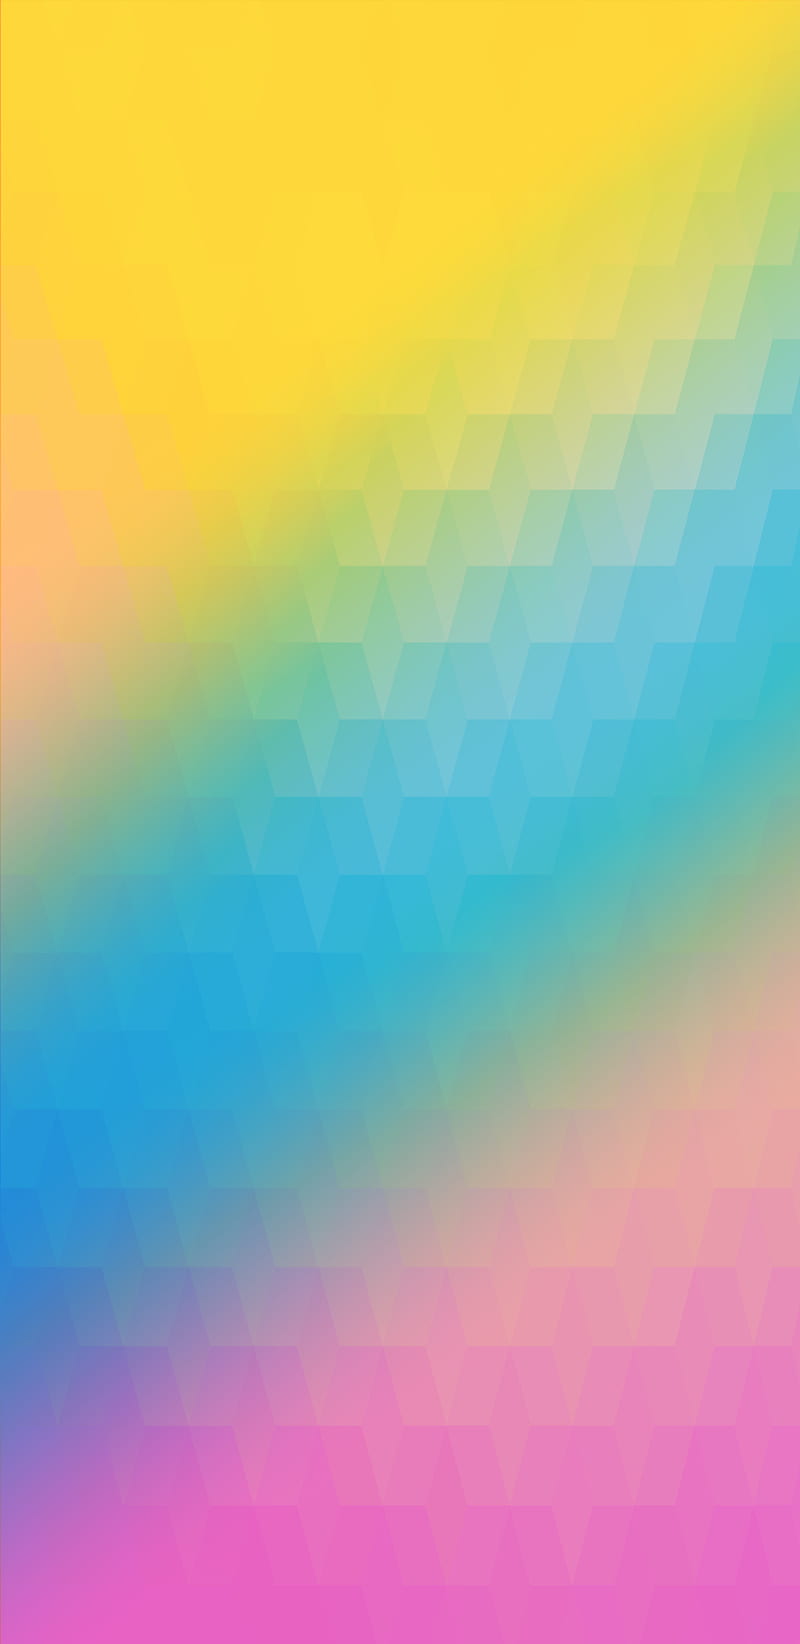 QLD03, colors, edge, gradient, rainbow, red, yellow, HD phone wallpaper